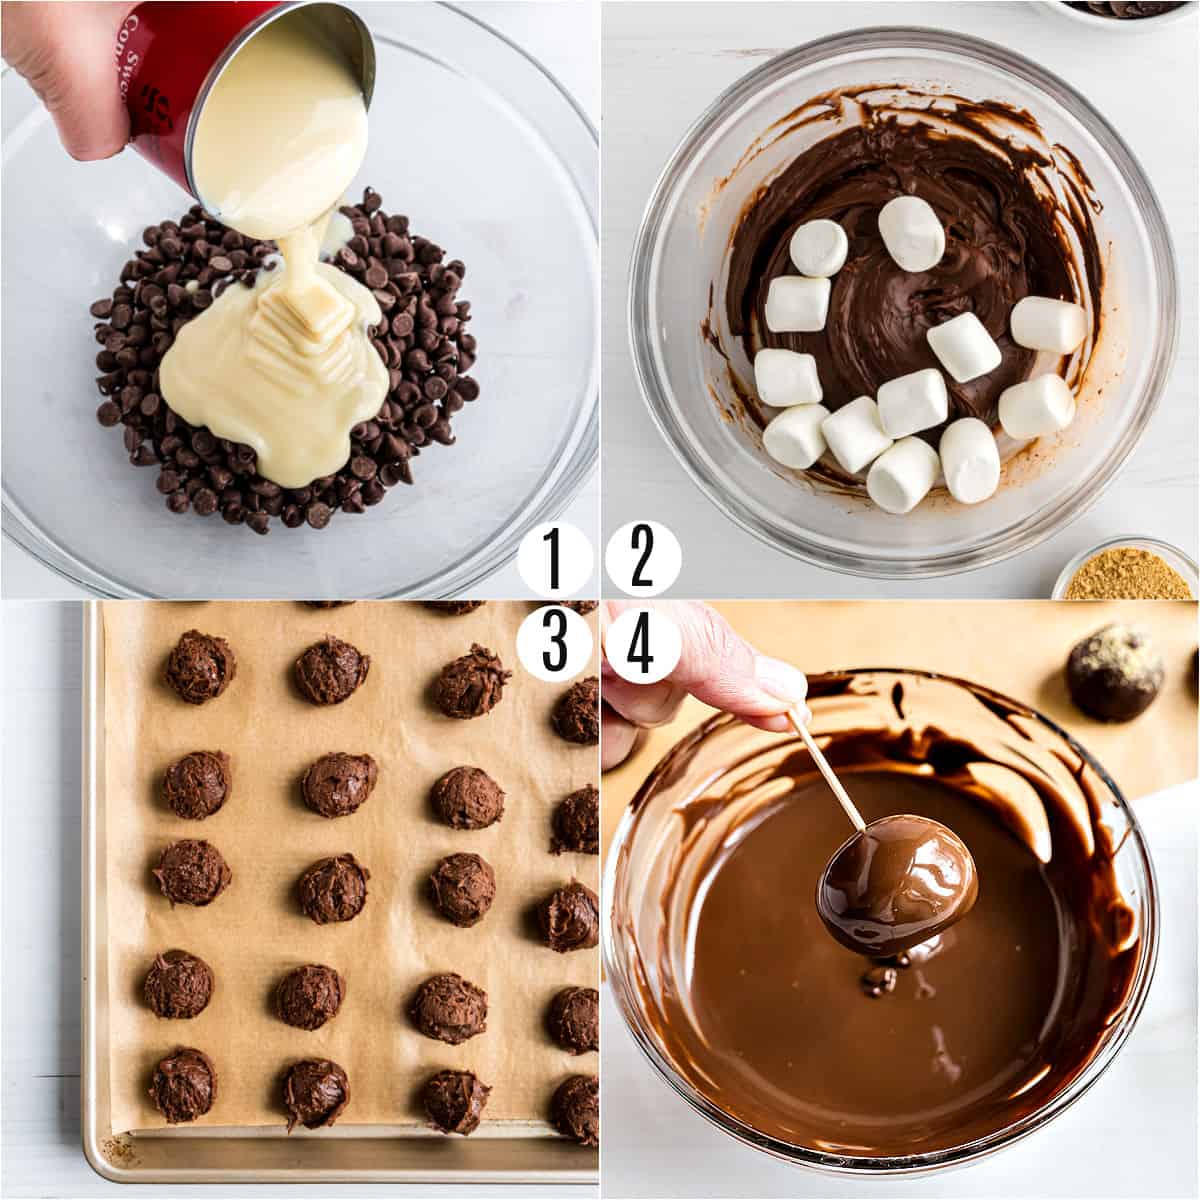 Step by step photos showing how to make chocolate truffles.